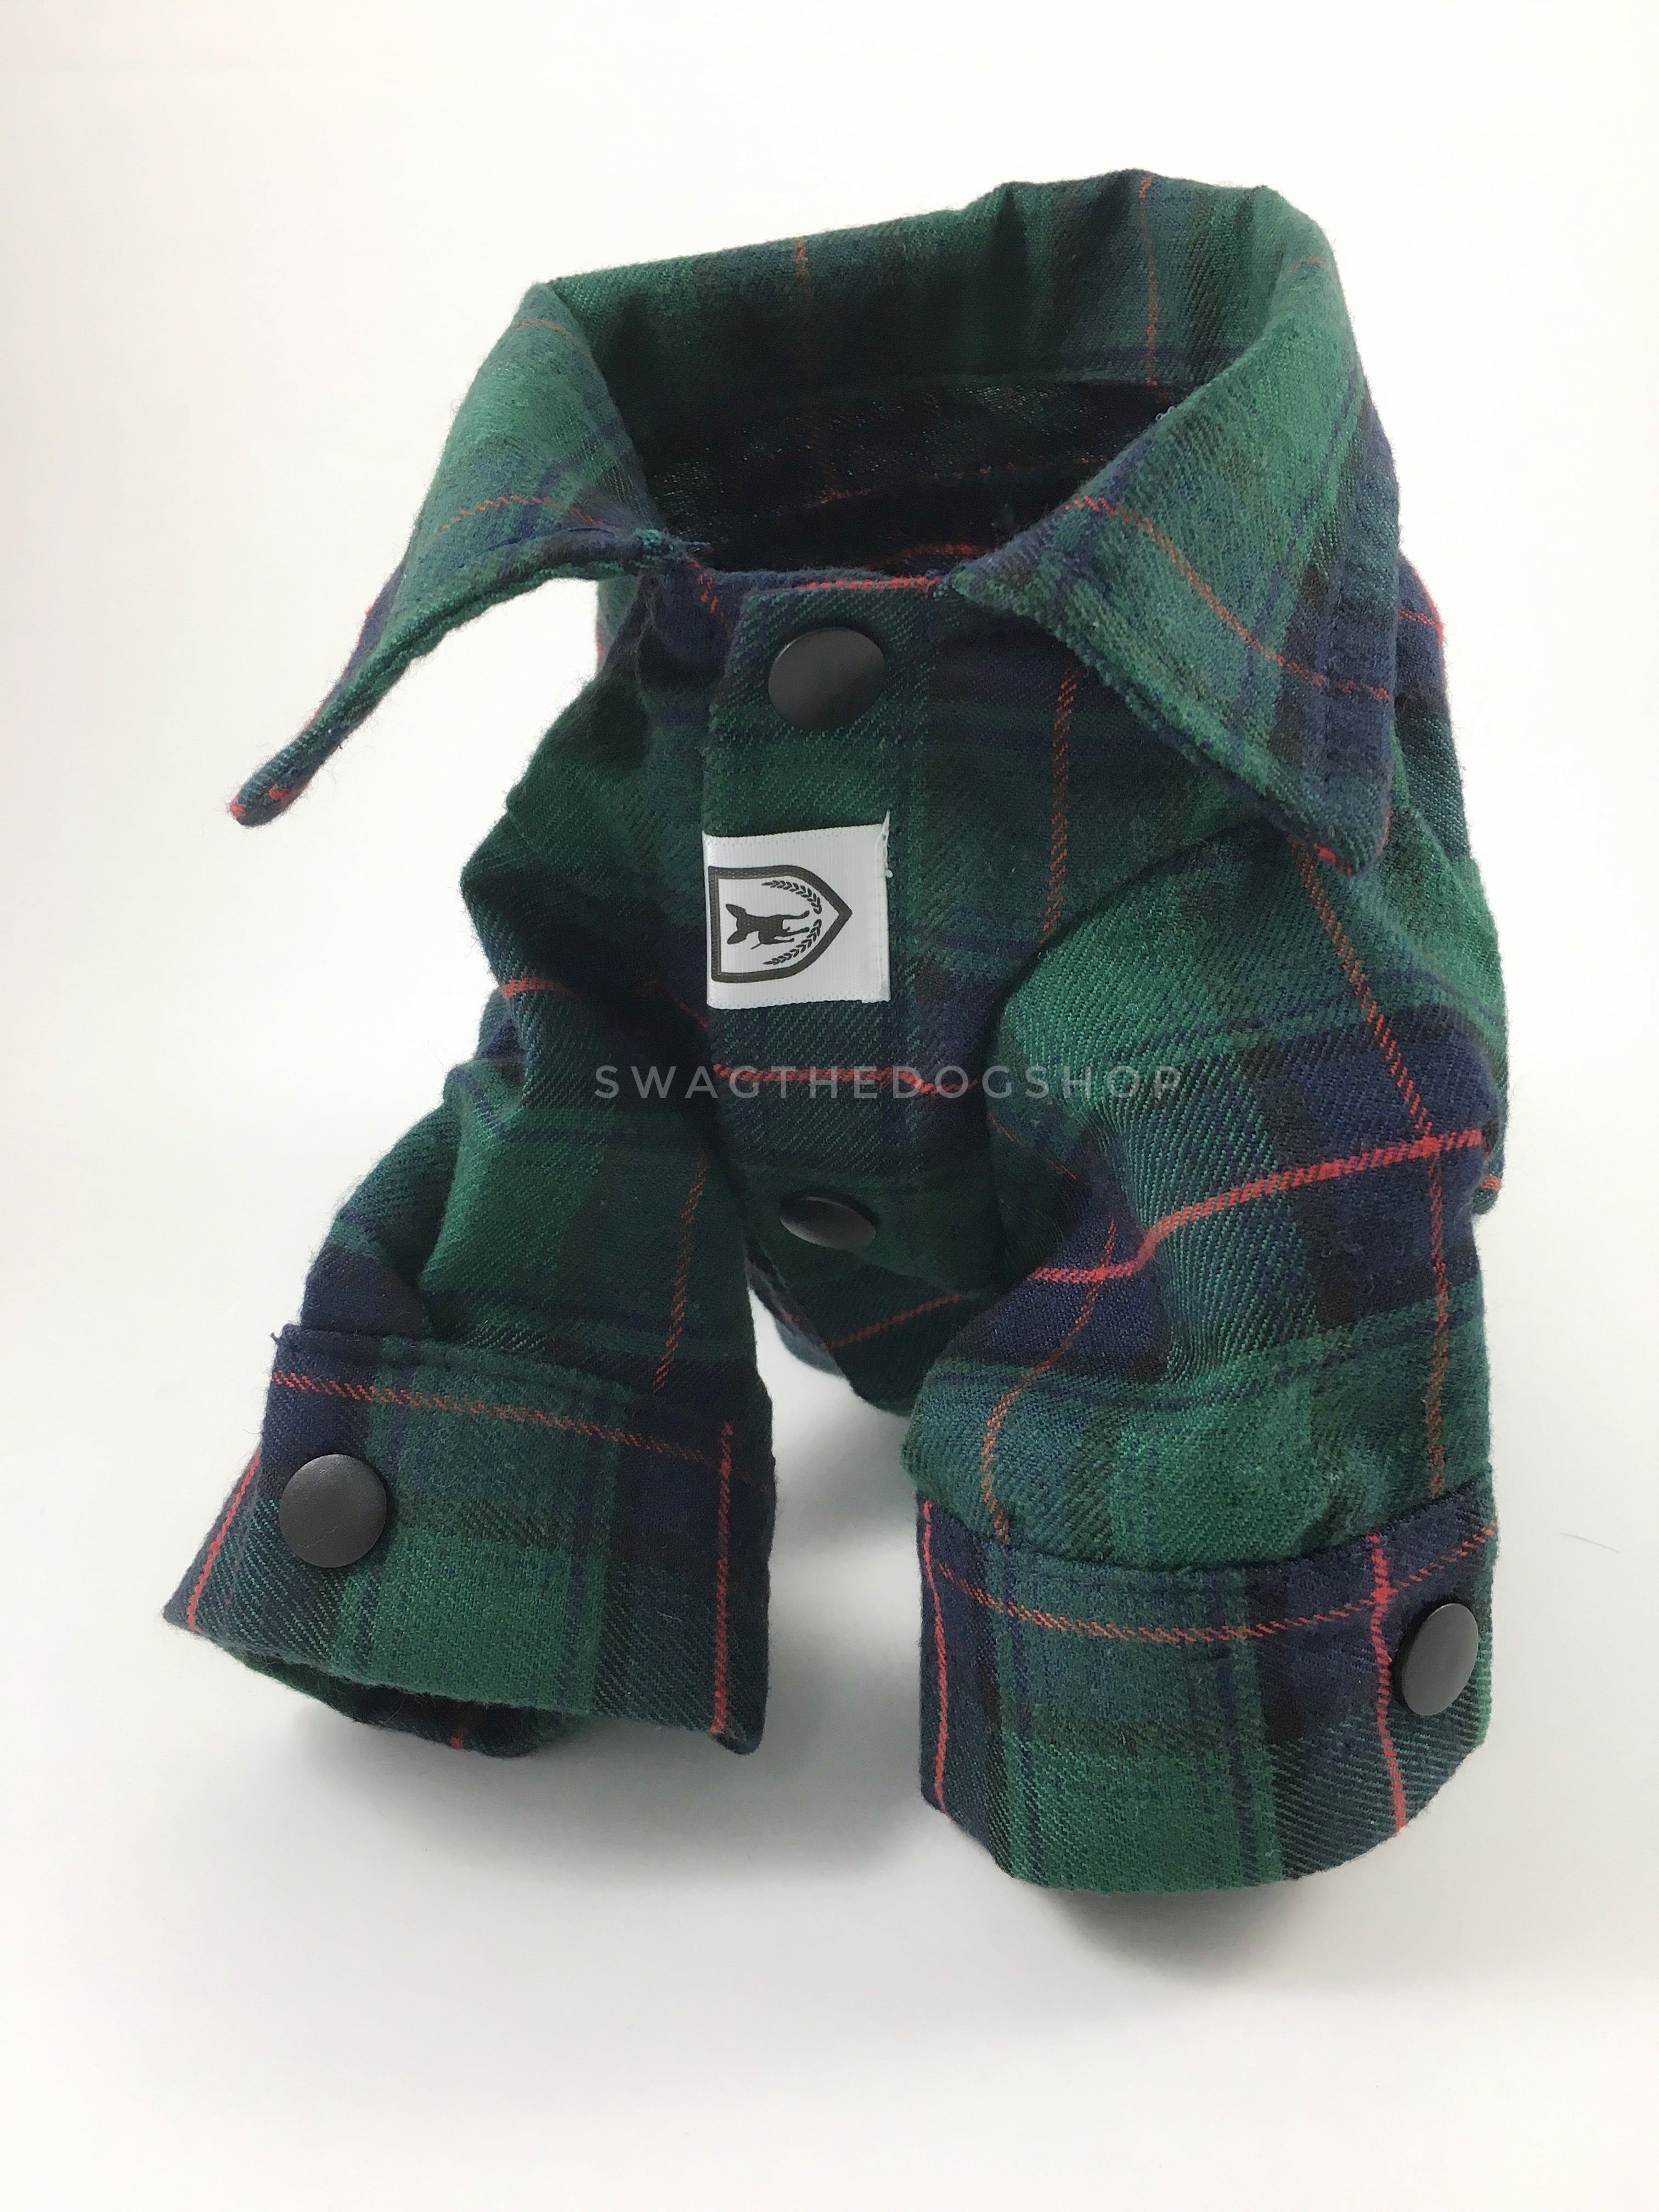 True North Green Plaid Shirt - Product Upright Front View. Green Plaid Shirt